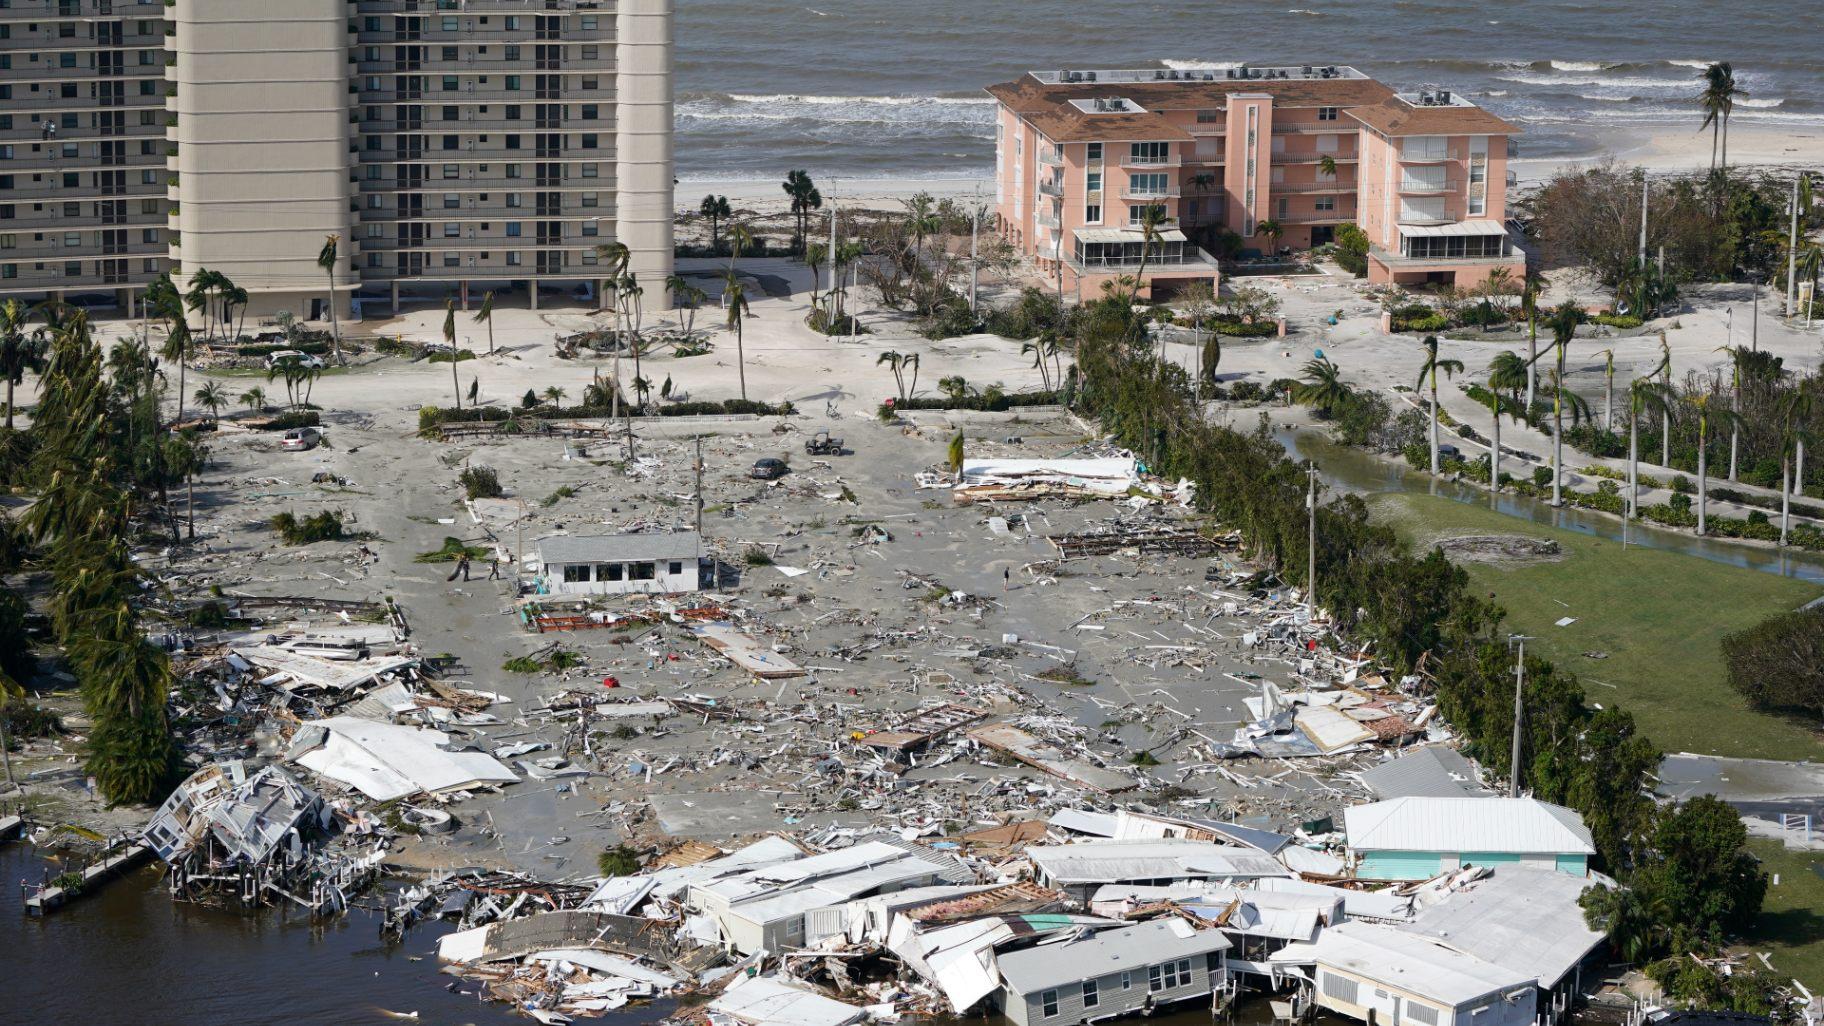 Damaged structures are seen in the wake of Hurricane Ian, Thursday, Sept. 29, 2022, in Fort Myers Beach, Fla. (AP Photo / Wilfredo Lee)